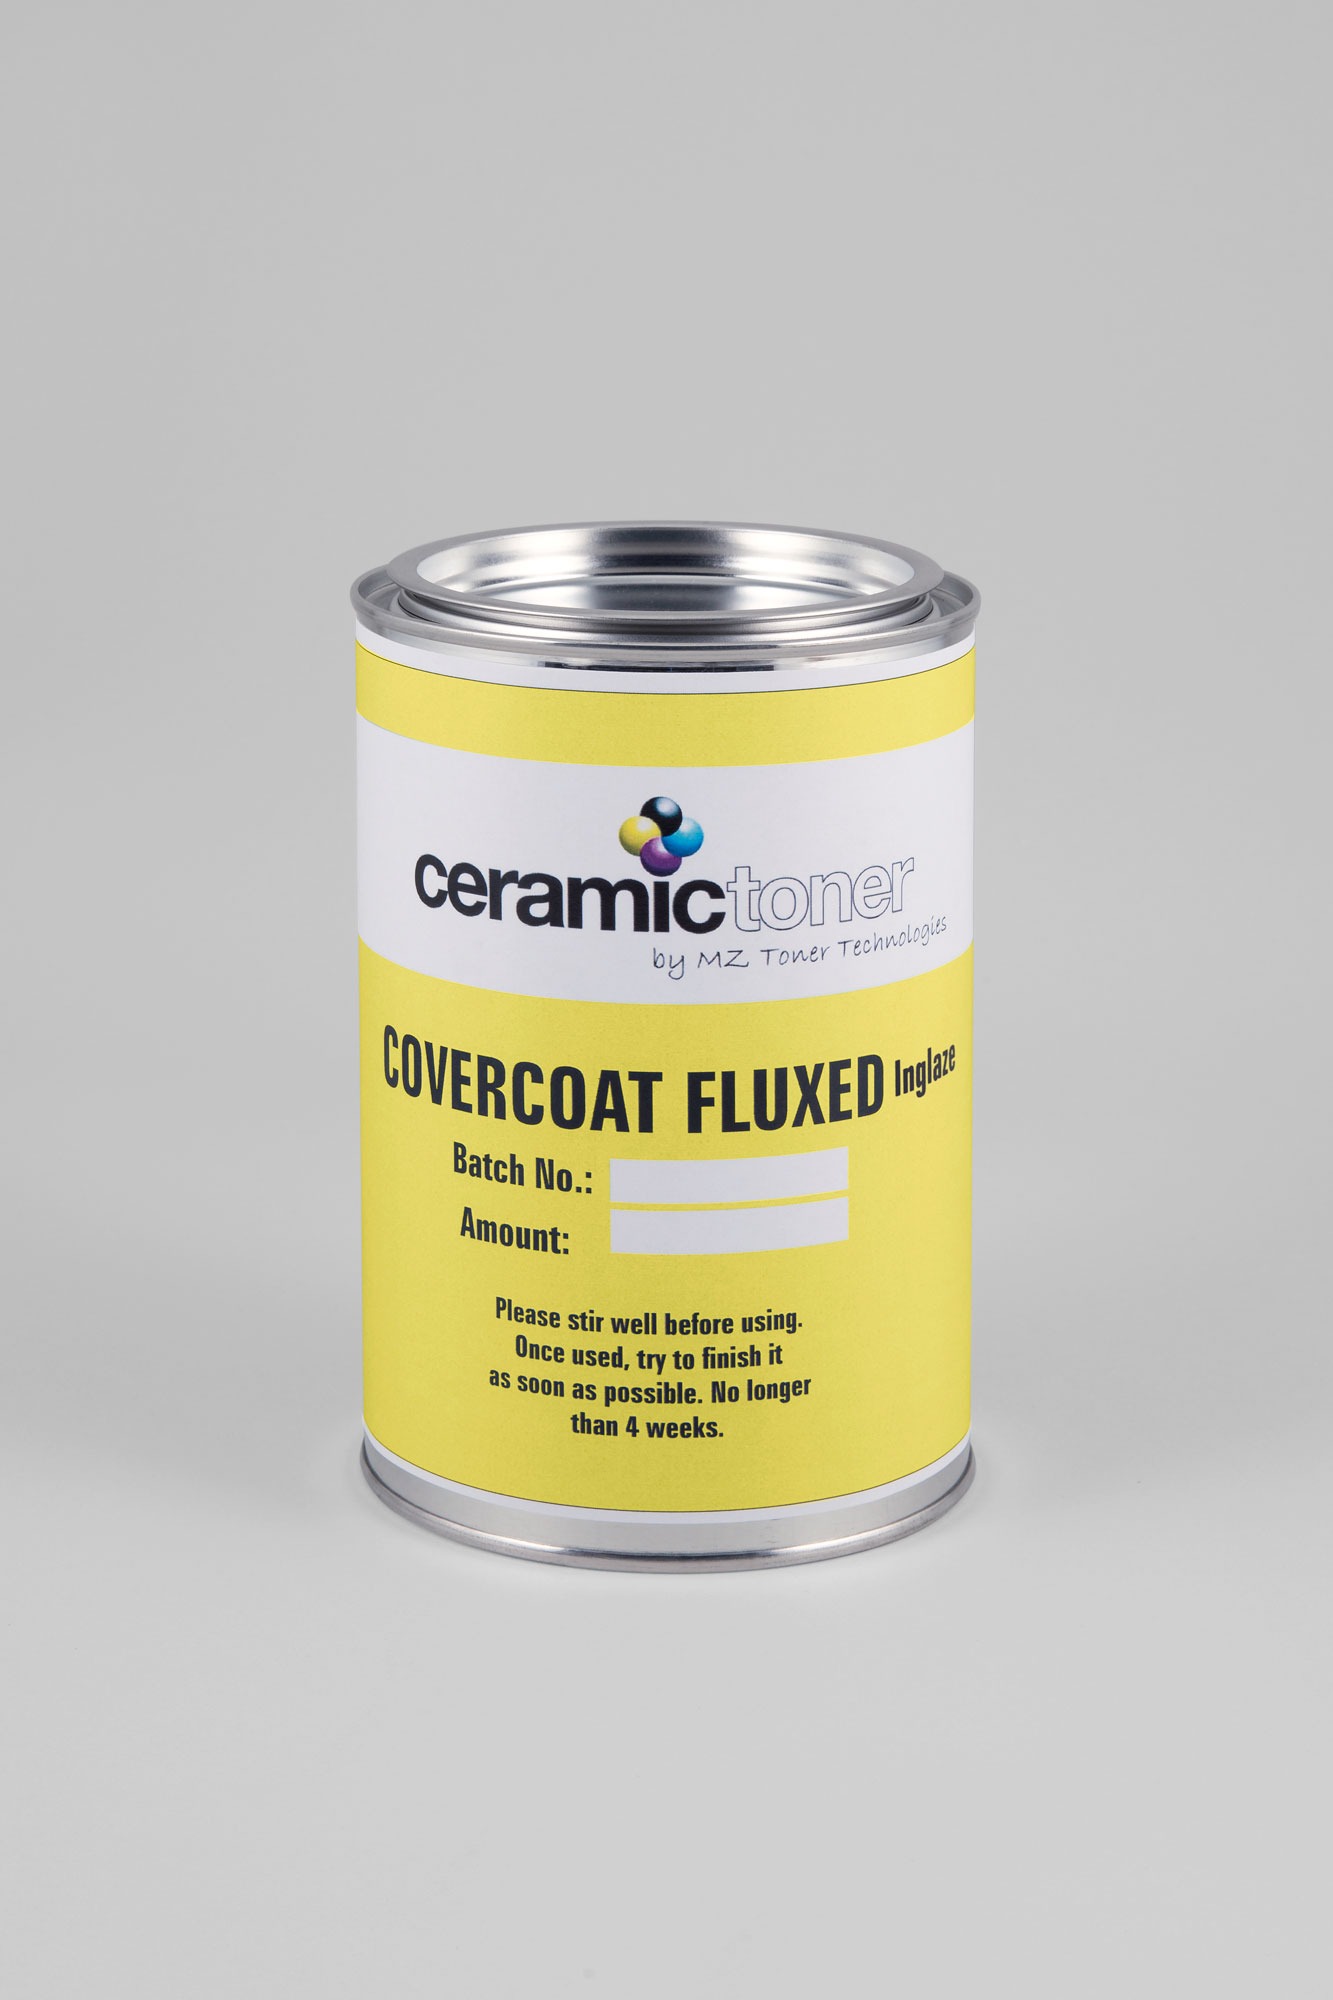 Ceramictoner Covercoat Fluxed Inglaze is coating with inglaze flow. The coating is in a can and is suitable for high-temperature areas. The varnish is yellowish.